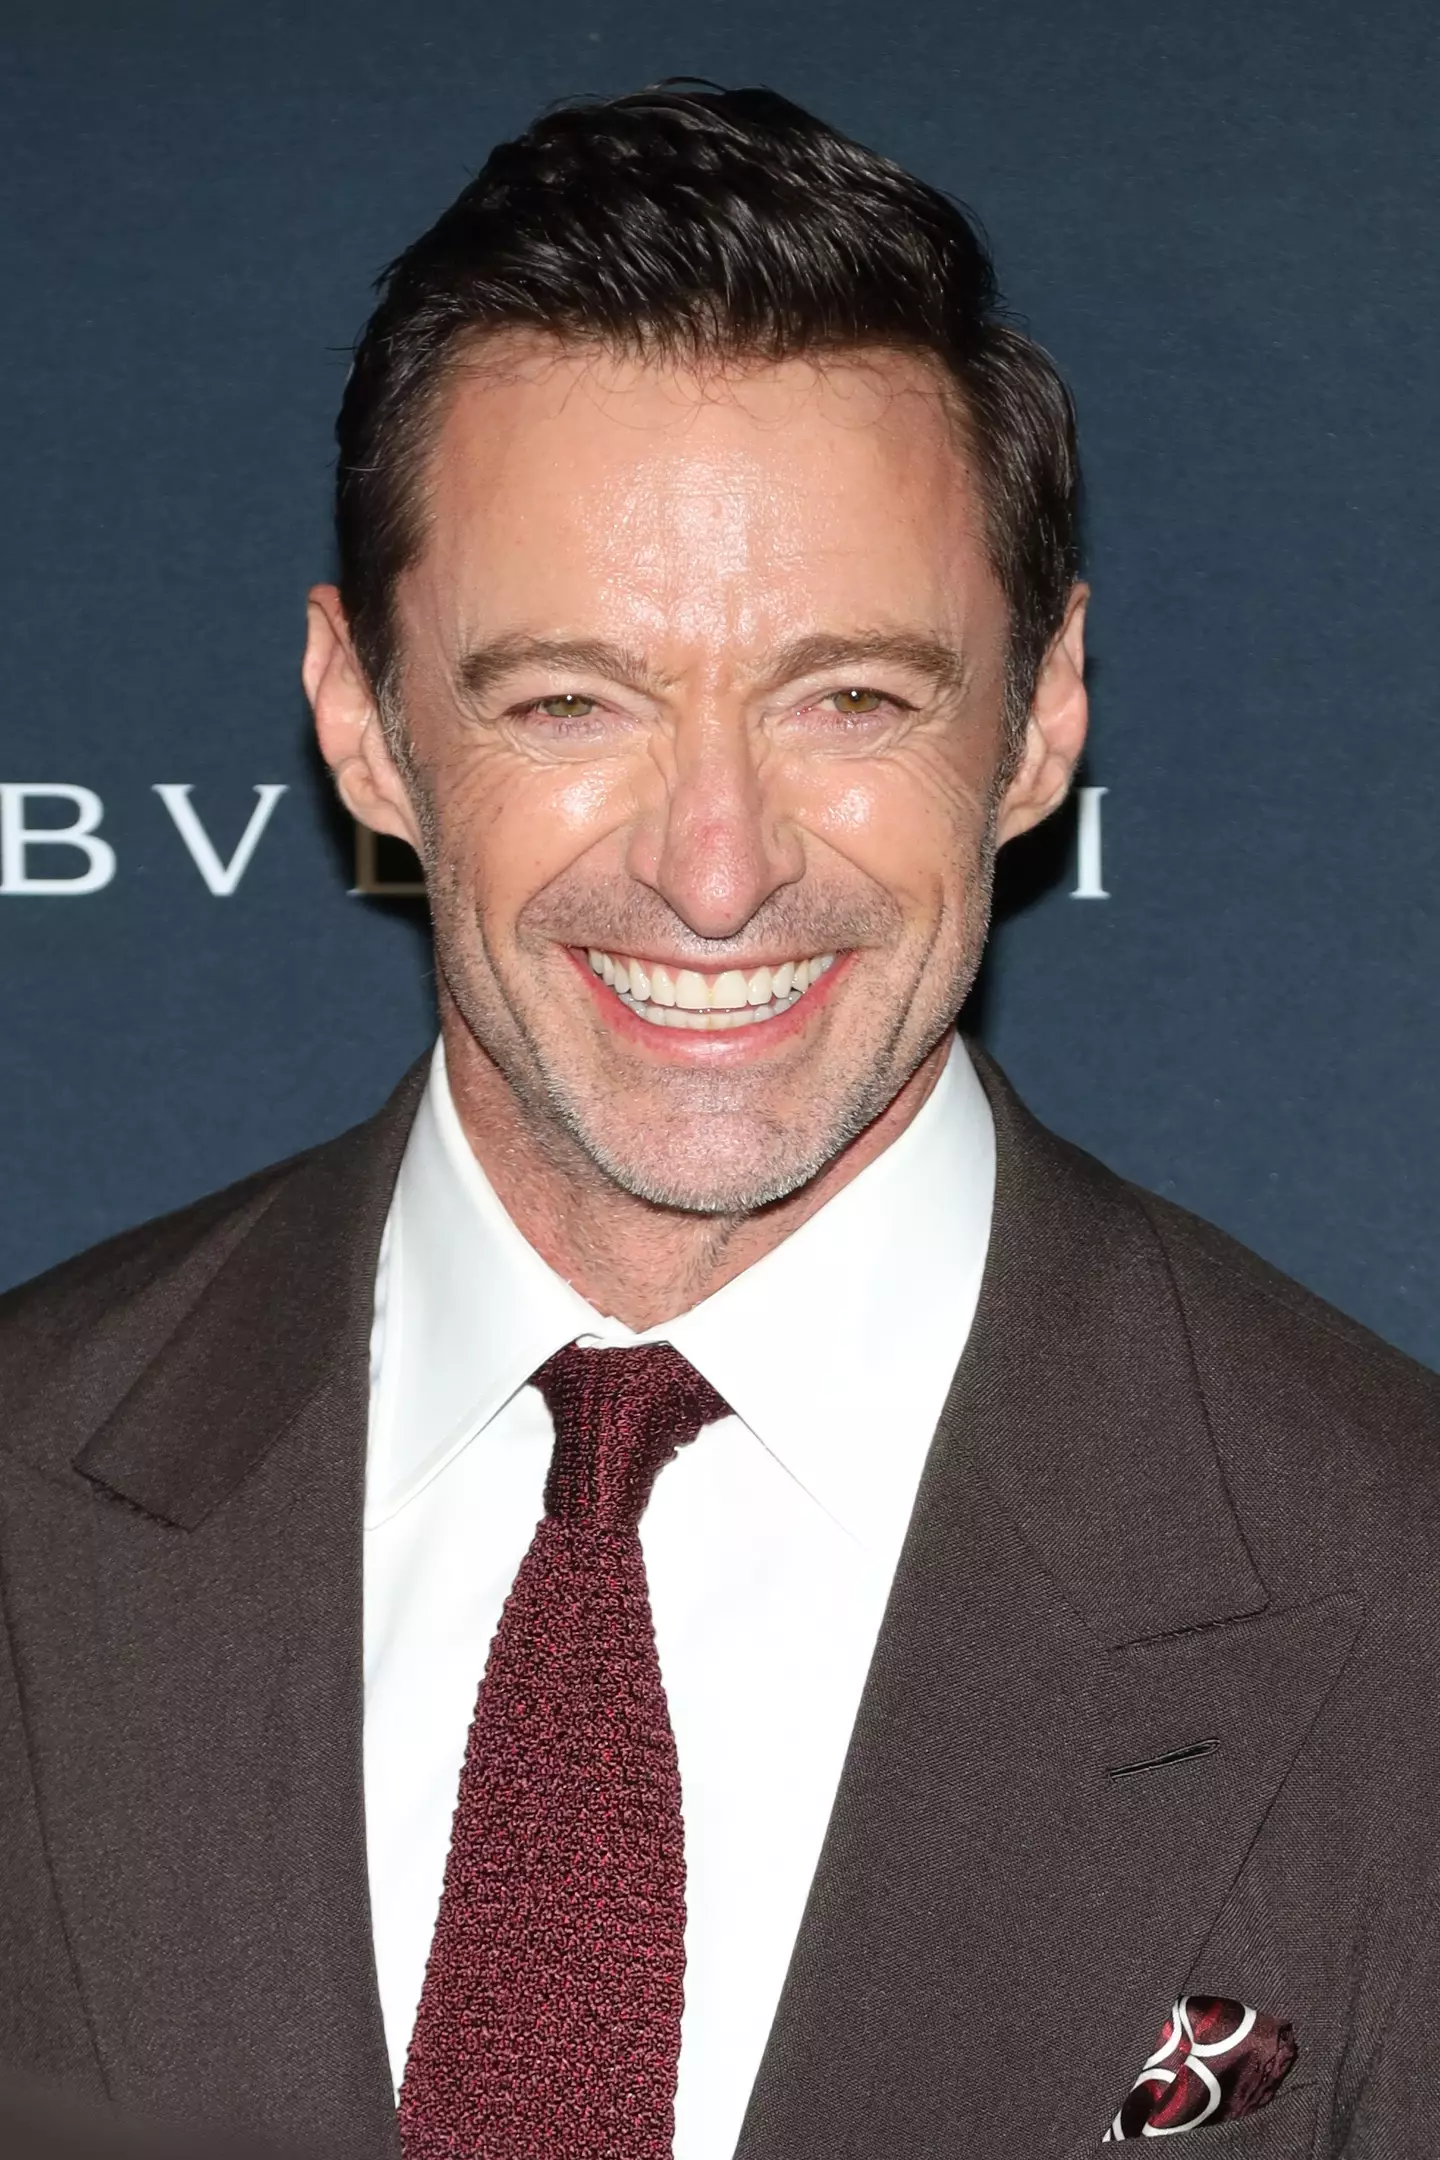 Hugh Jackman plays a retired boxer in the movie.